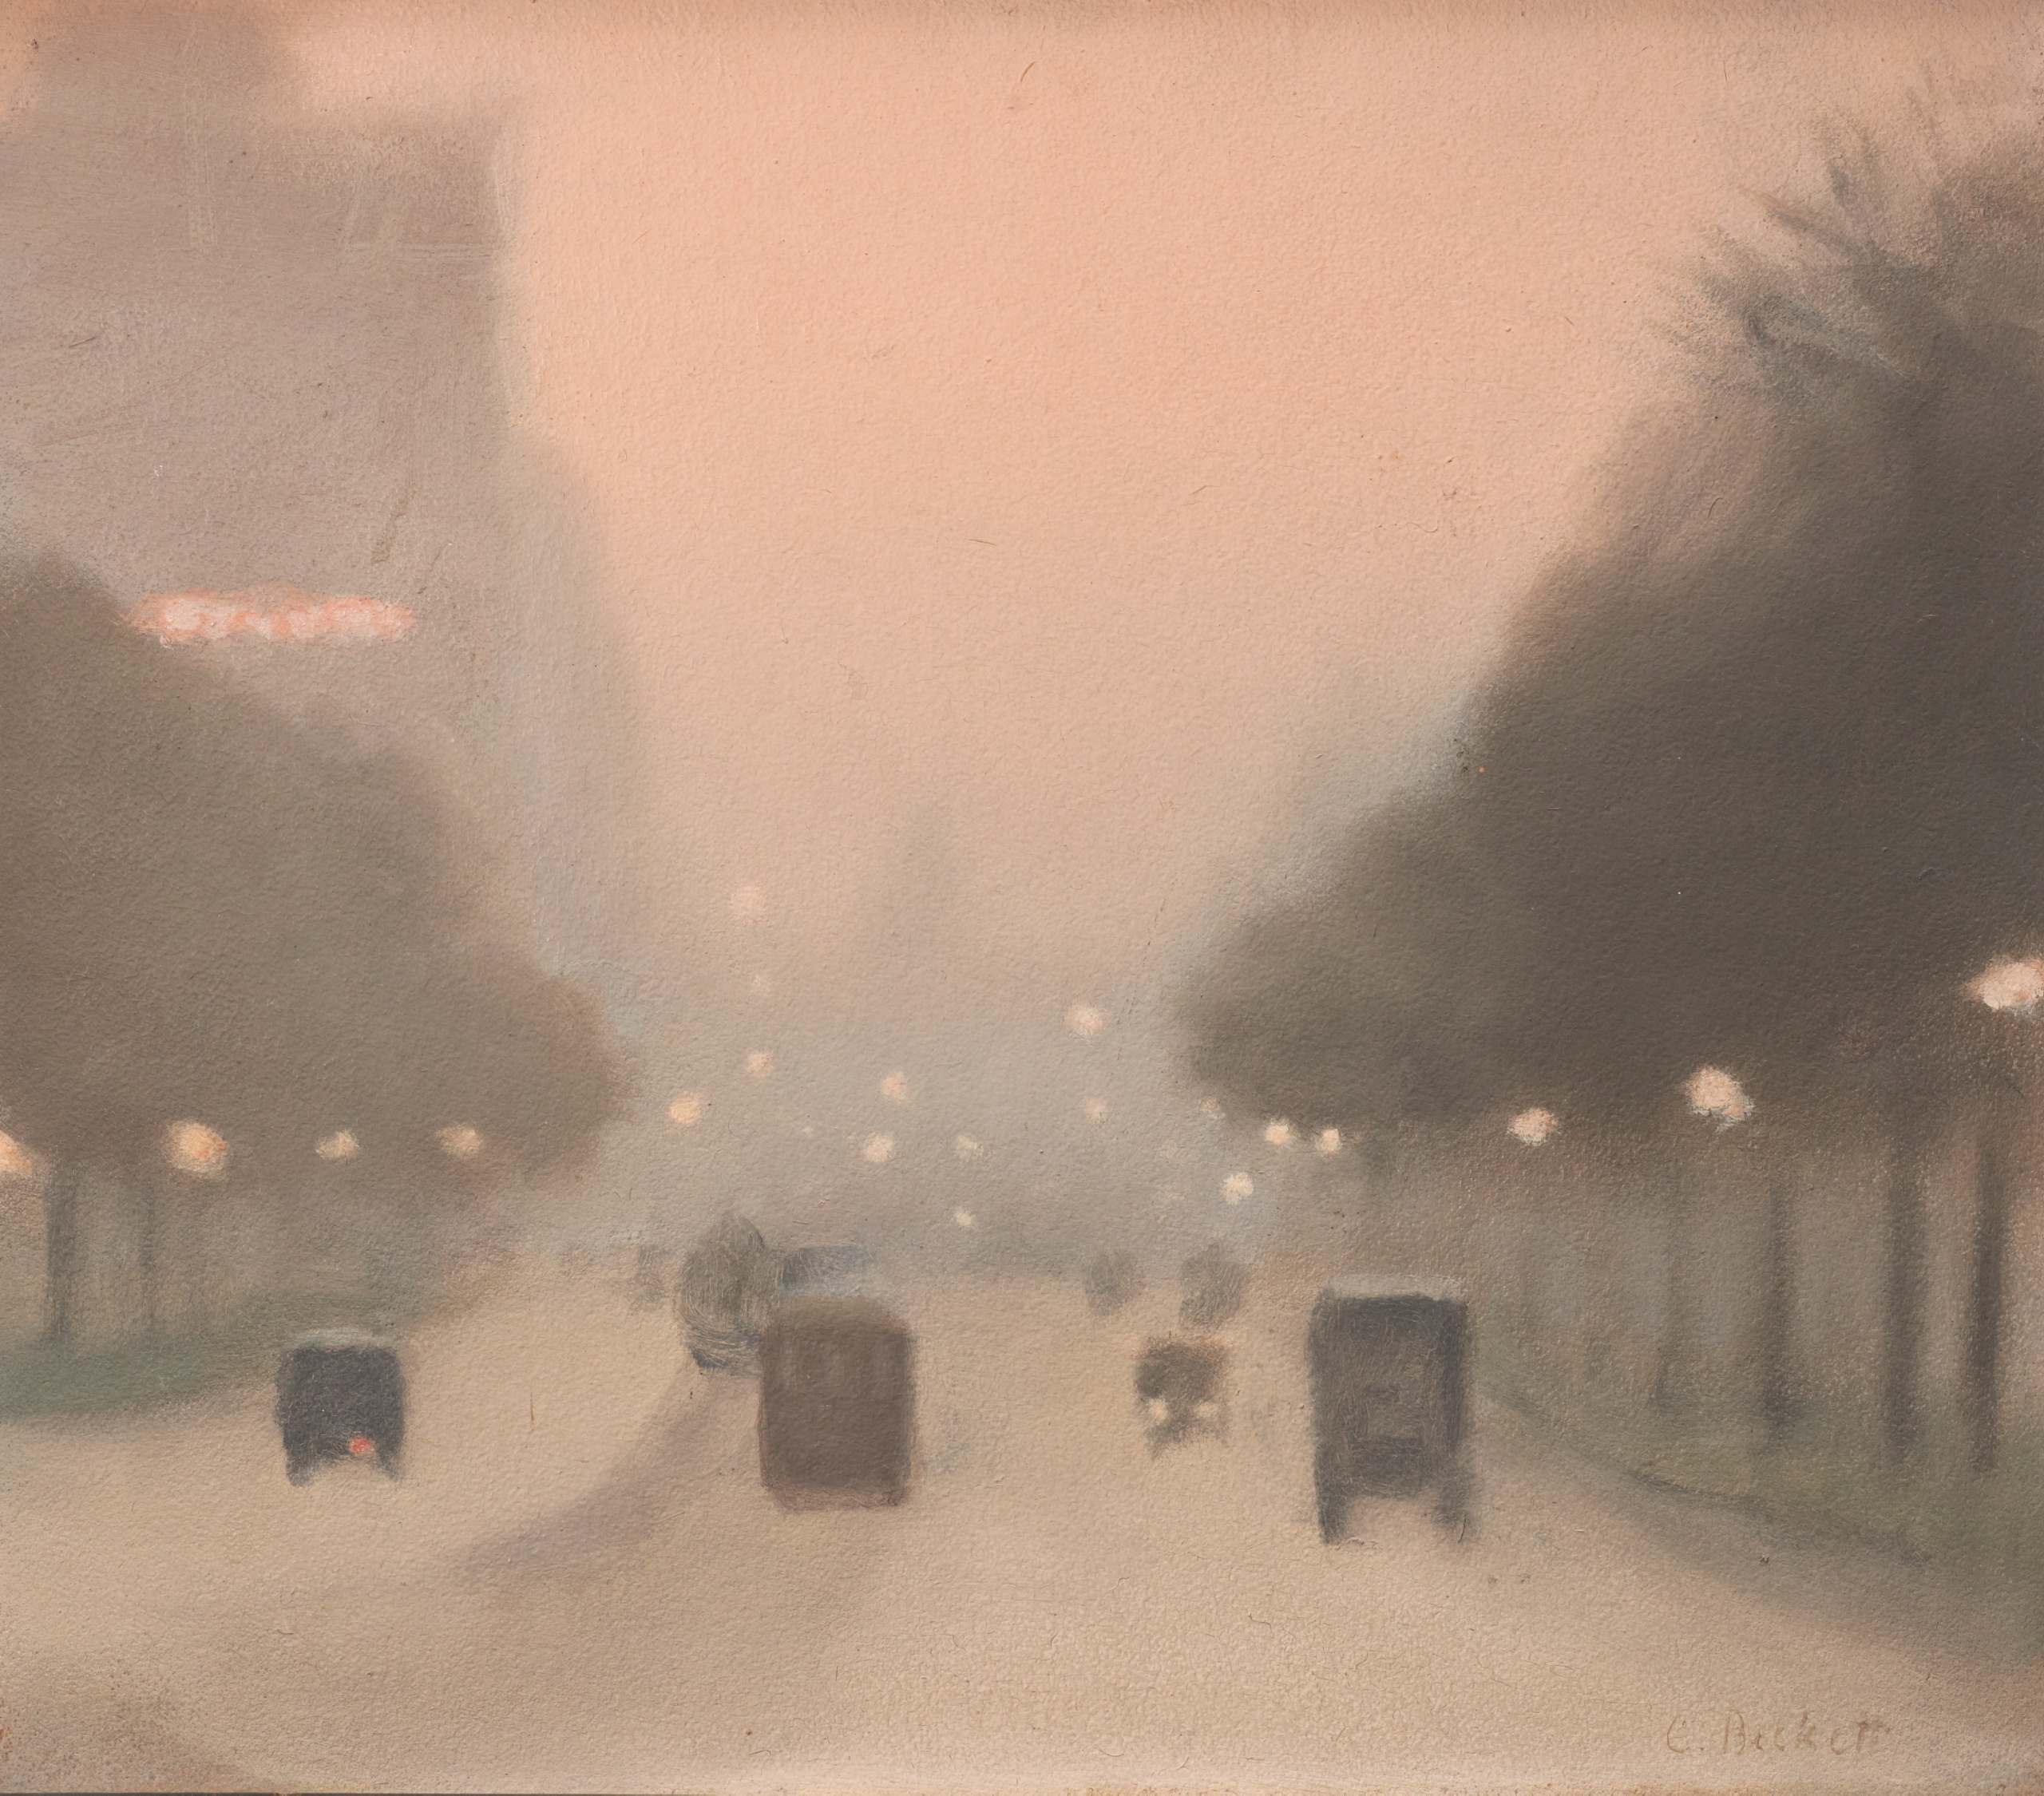 Evening, St Kilda Road by Clarice Beckett - c. 1930 - 35.5 x 40.5 cm Art Gallery of New South Wales